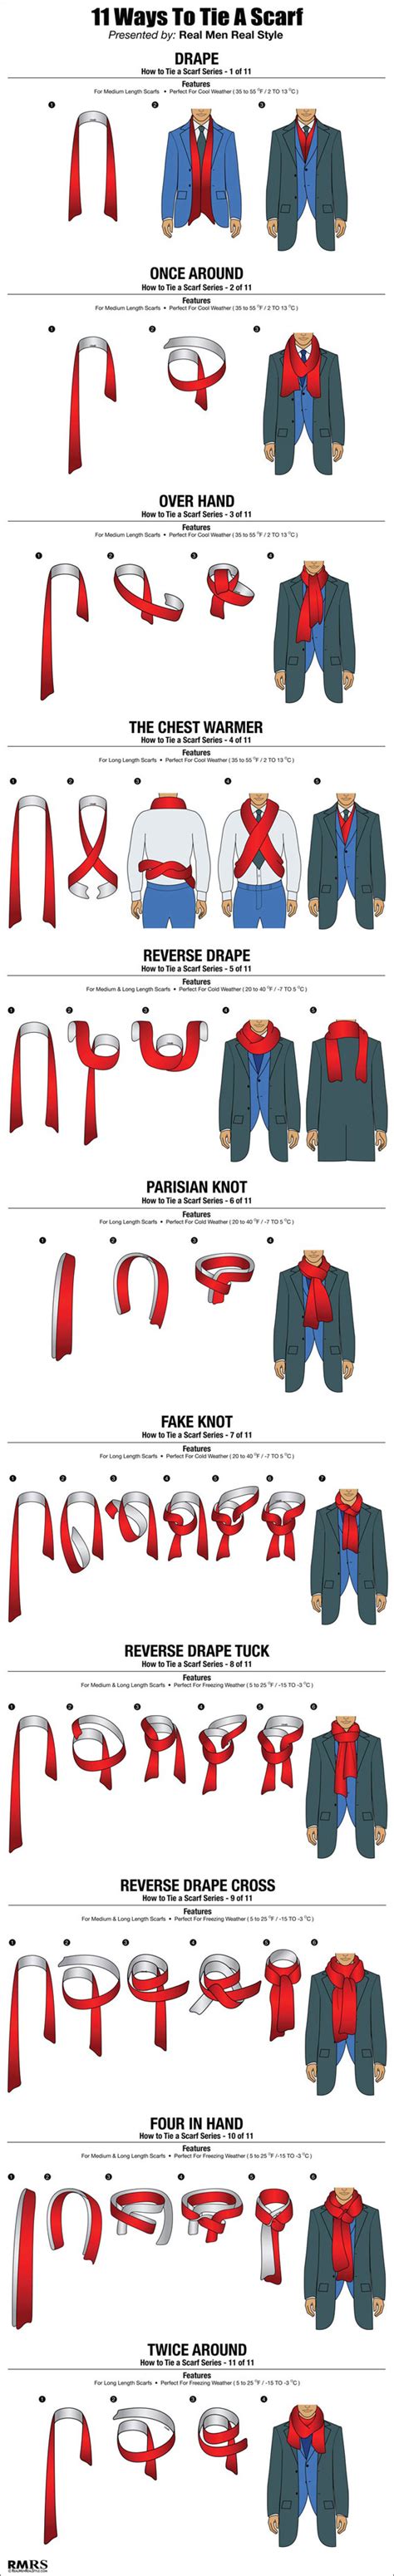 Fall season is here and you're ready to dress with aplomb. 11 Ways A Guy Can Tie His Scarf